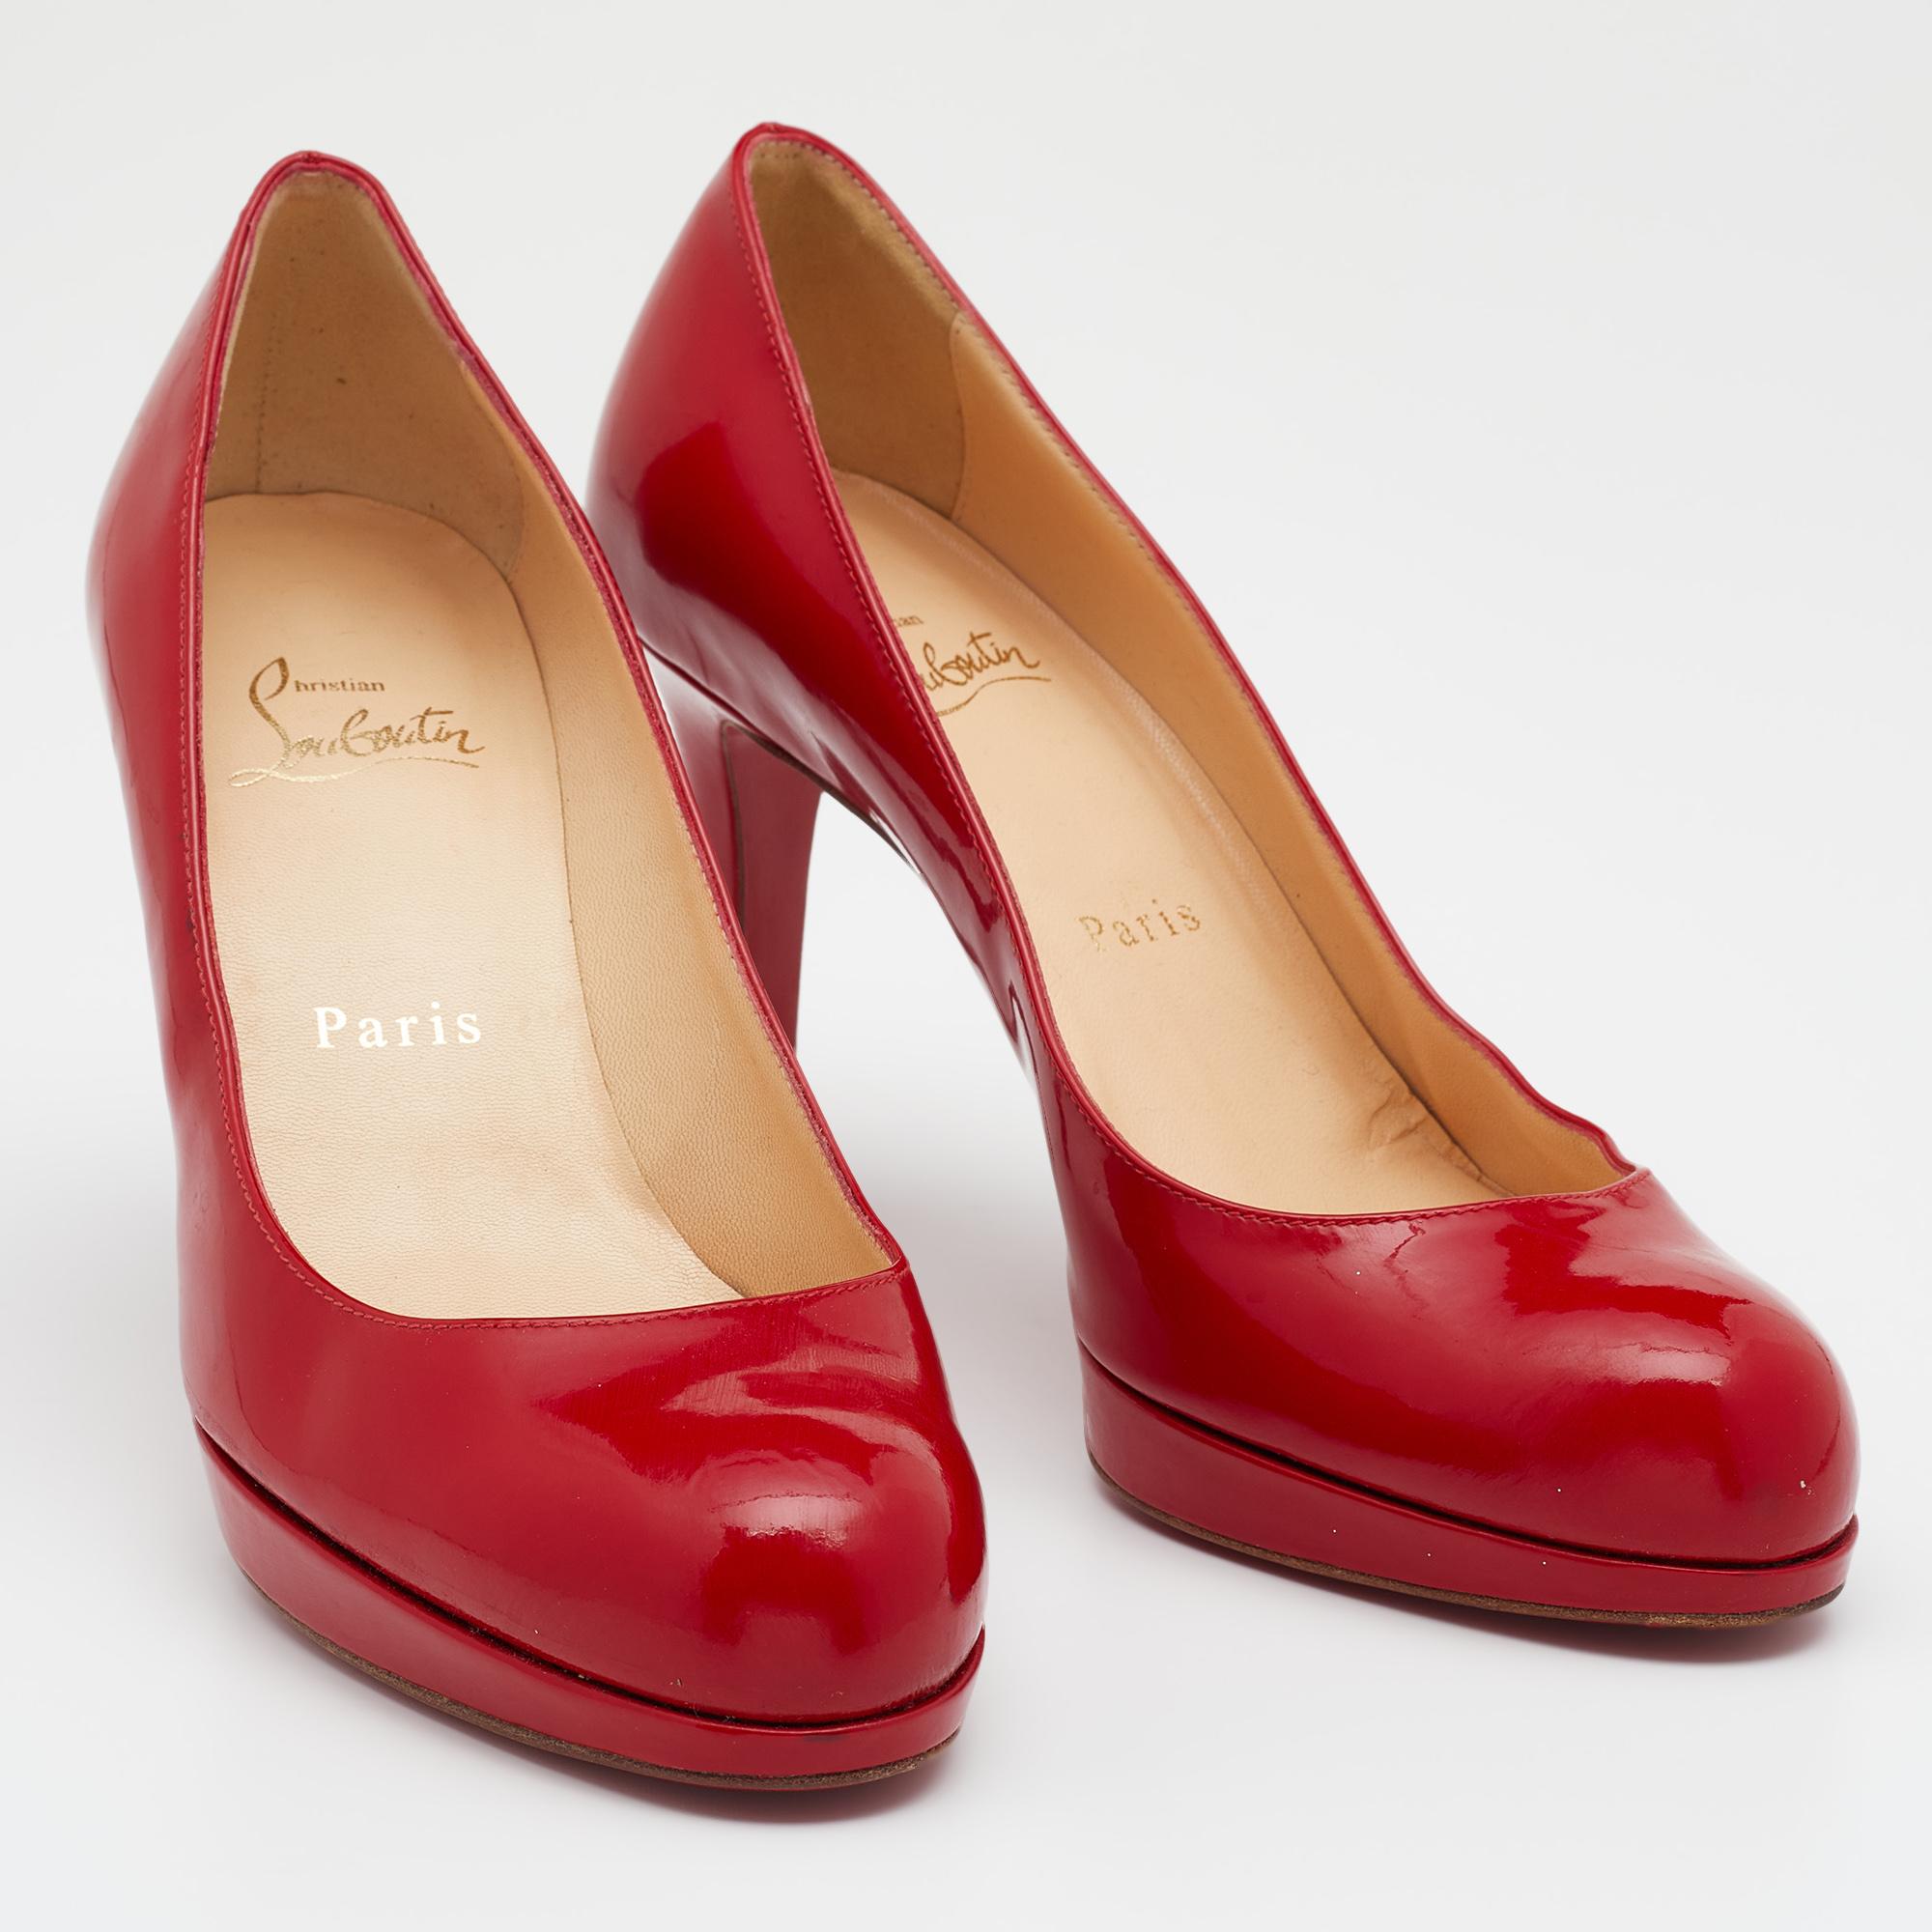 The 9cm heels and platforms of this pair of Christian Louboutin pumps will add a classic update to your ensemble. Created from patent leather, its signature red-lacquered soles mark the heritage of the brand, and it embodies an architectural shape.

